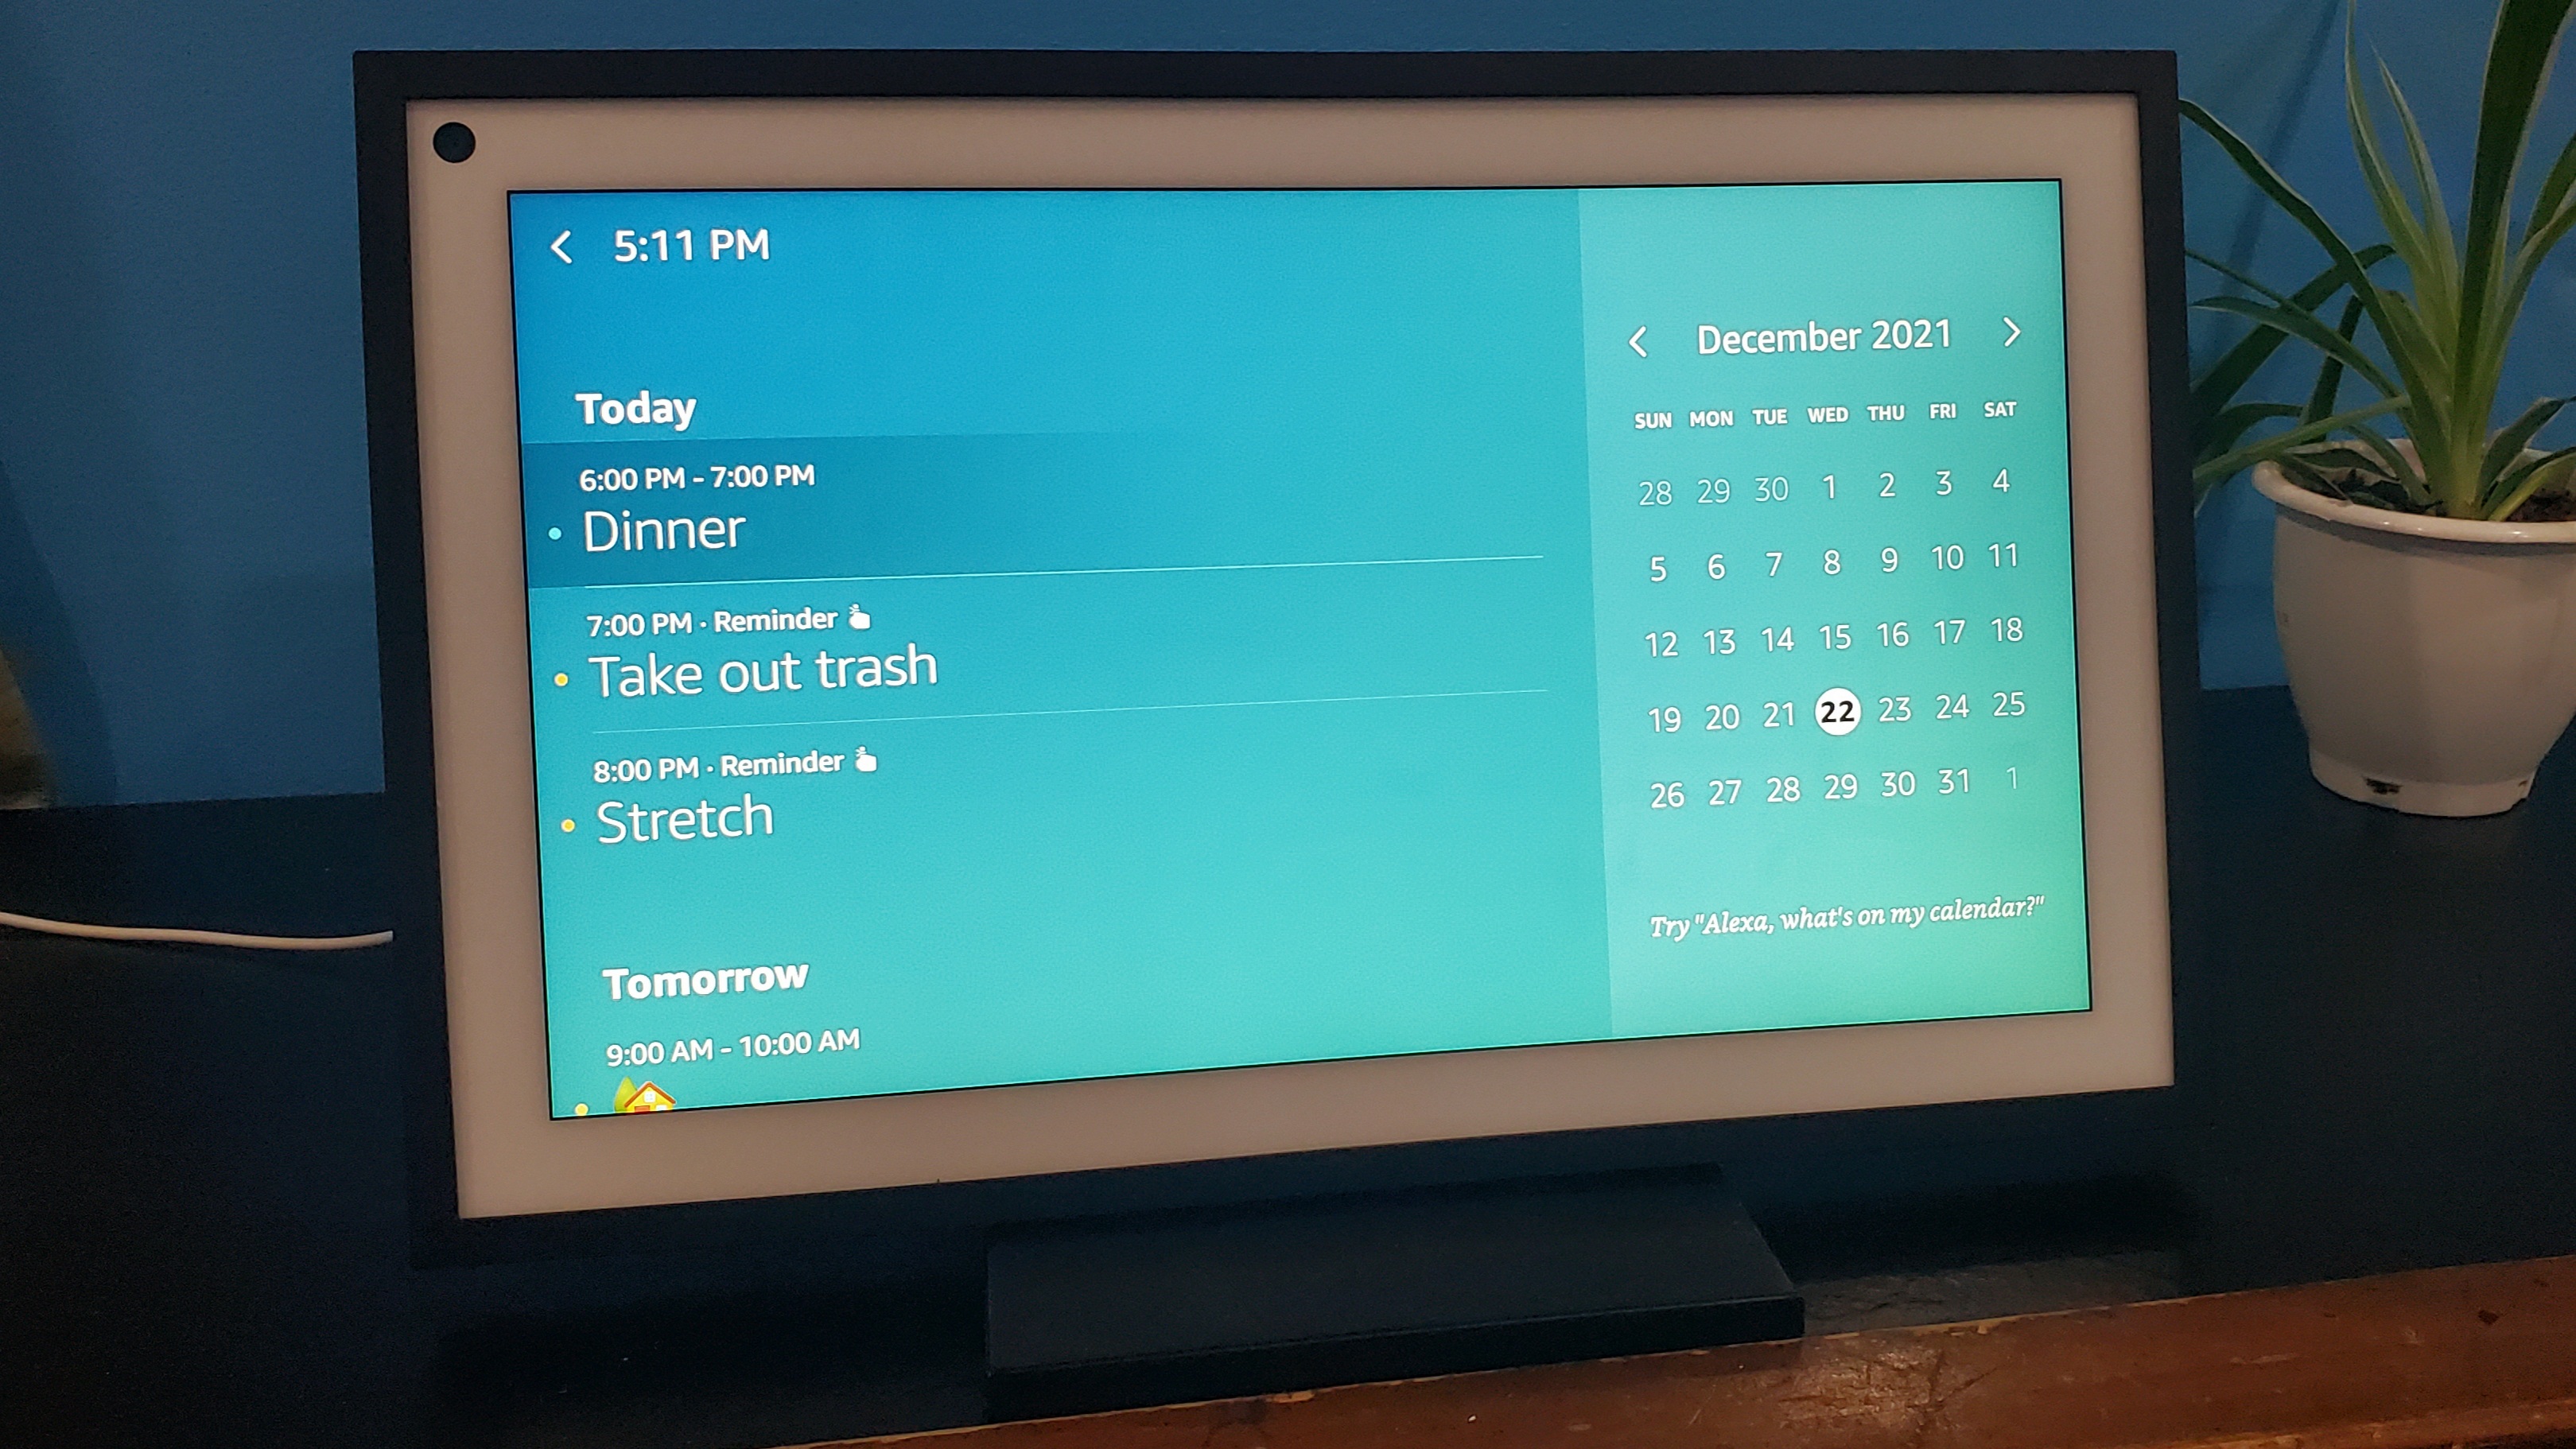 ready for Alexa skills pop-up on your Amazon Echo Show | Ars Technica